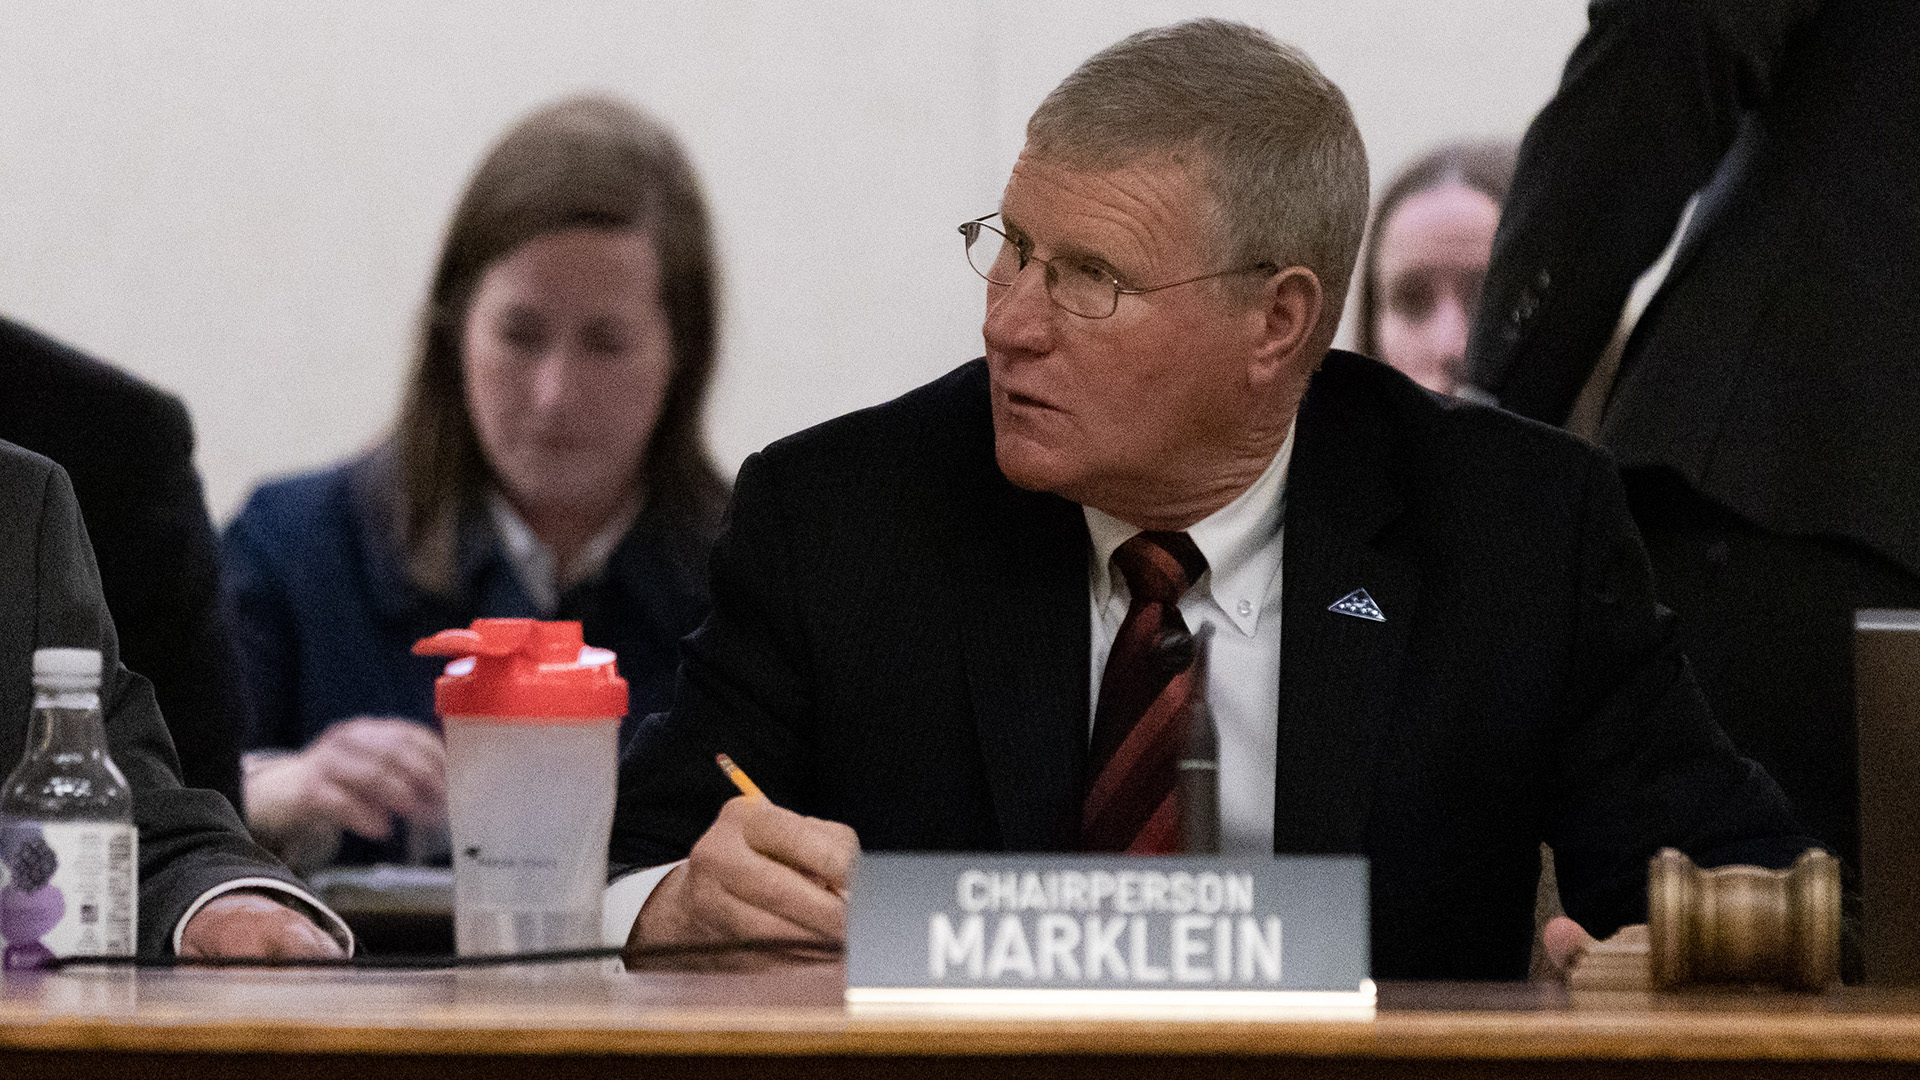 Howard Marklein sits at a table and writes with a pencil in his right hand, with a gavel sitting next to his left hand and a nameplate reading "Chairperson Marklein," with other people seated and standing in the background.